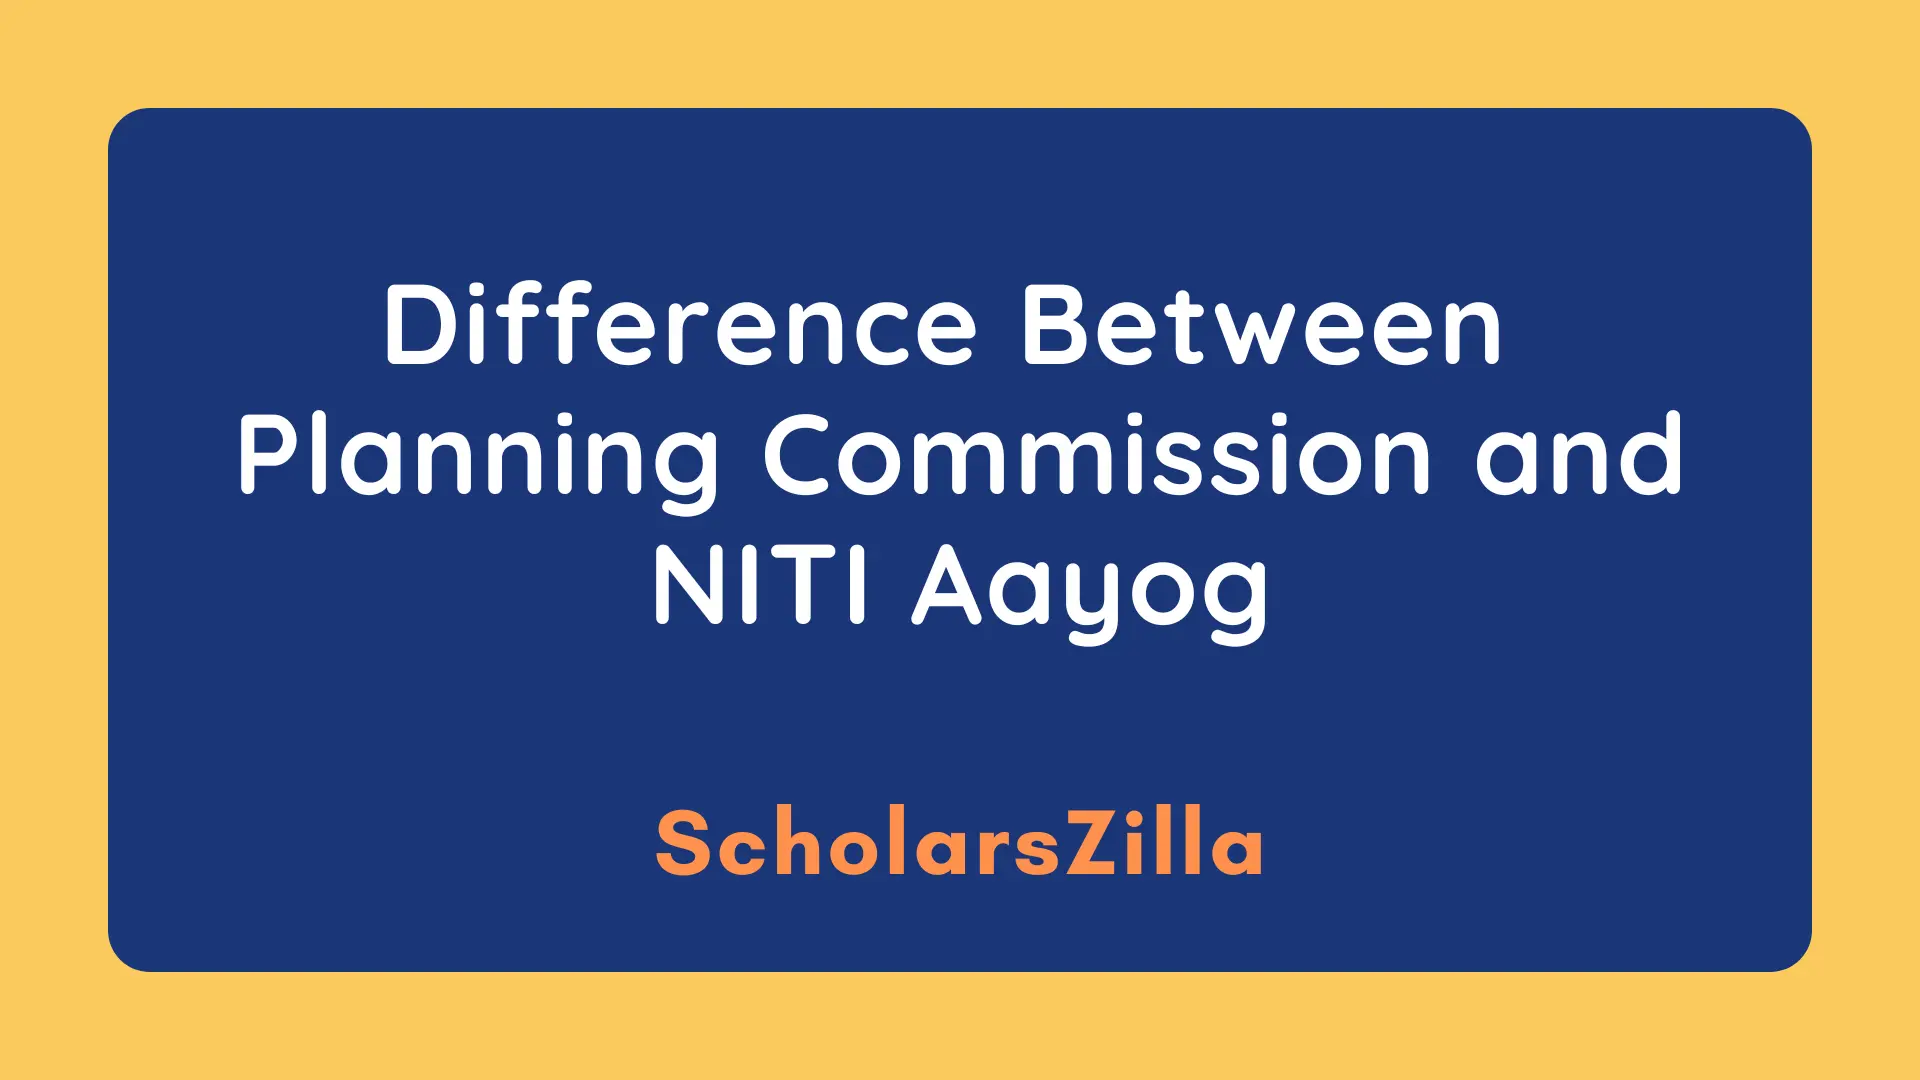 Difference Between Planning Commission and NITI Aayog